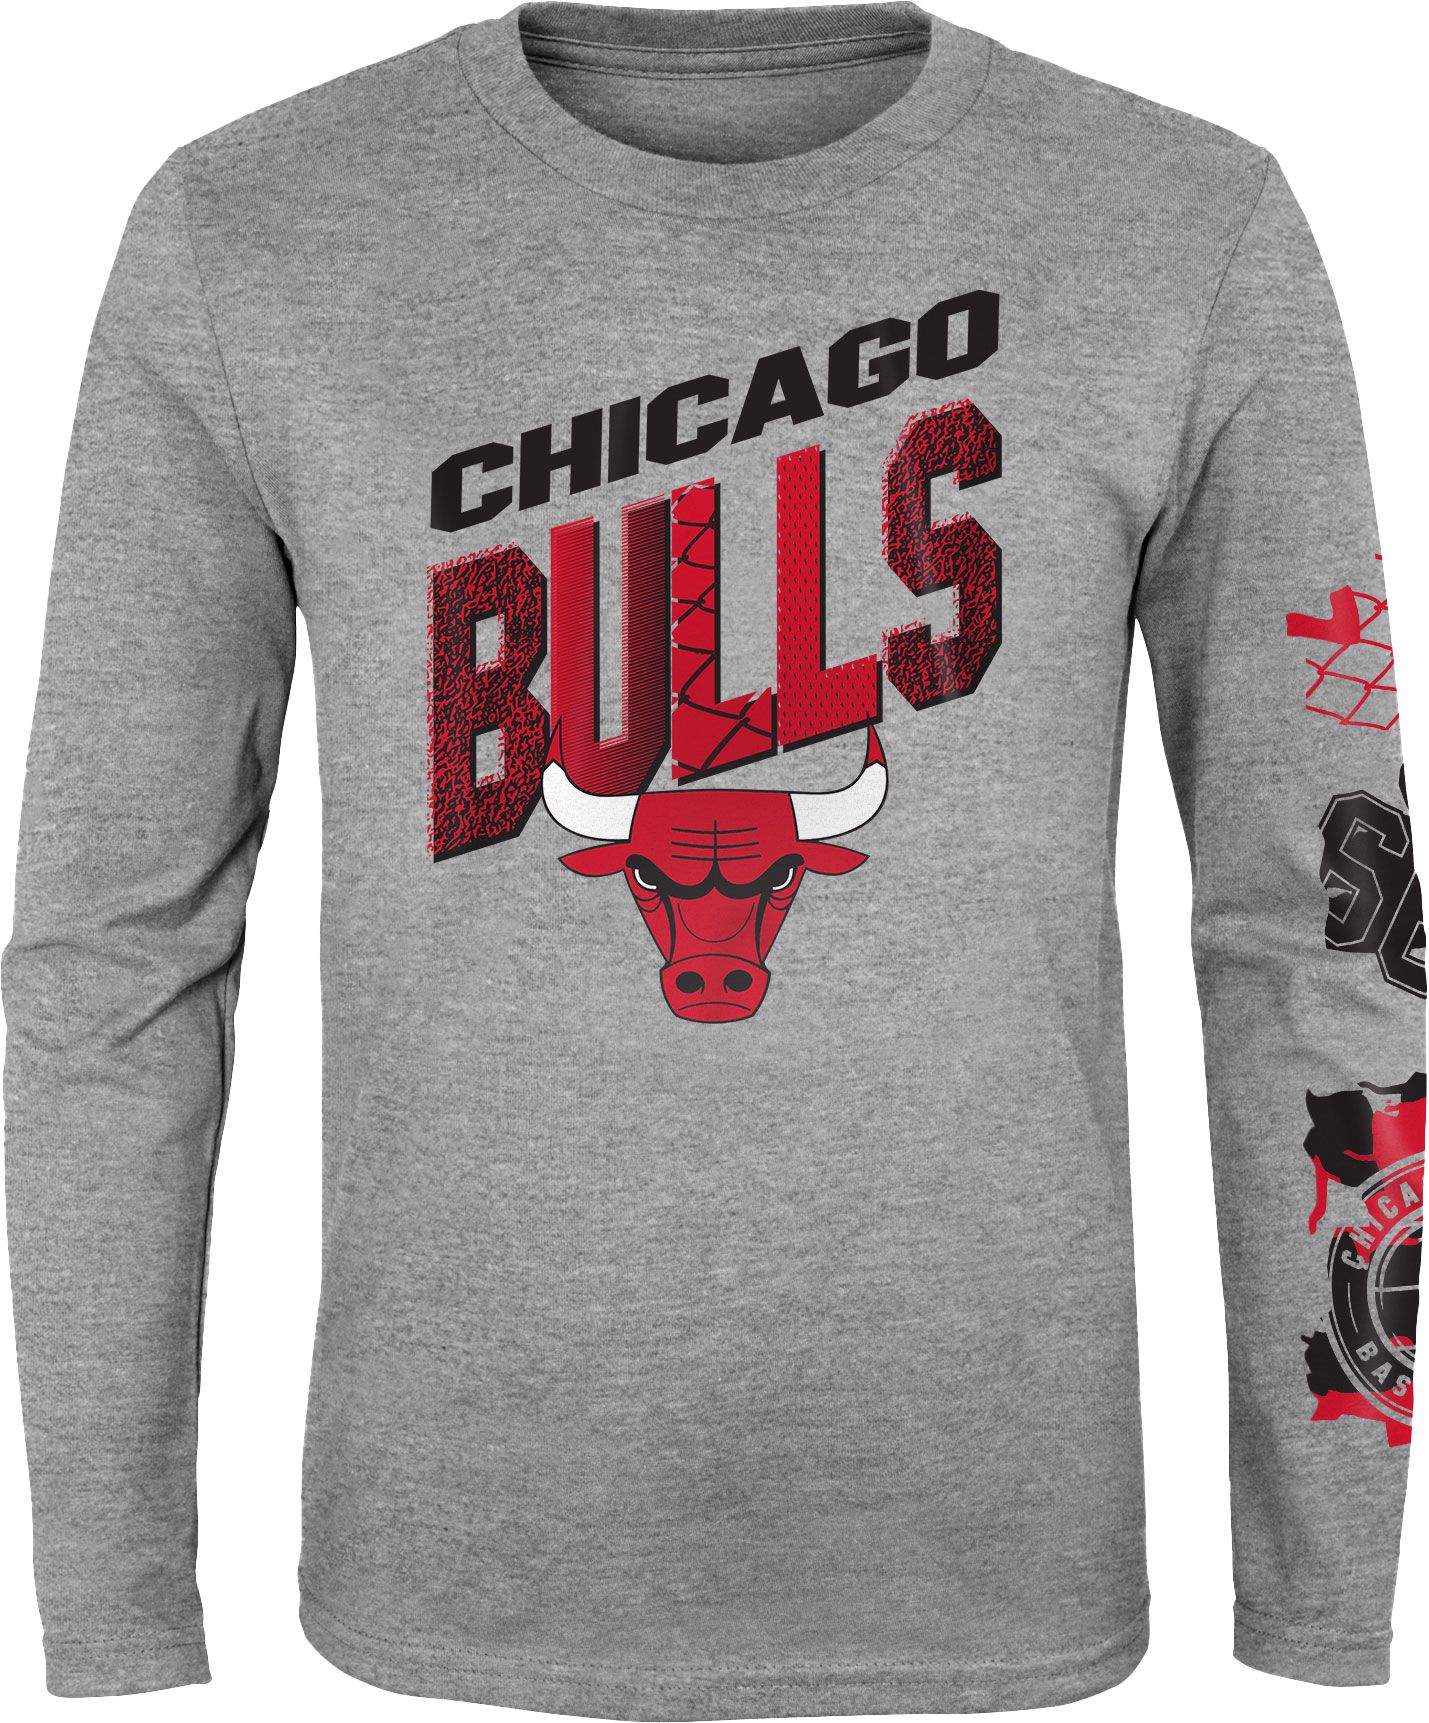 Outerstuff Youth Chicago Bulls Grey Parks & Wreck Long Sleeve T-Shirt